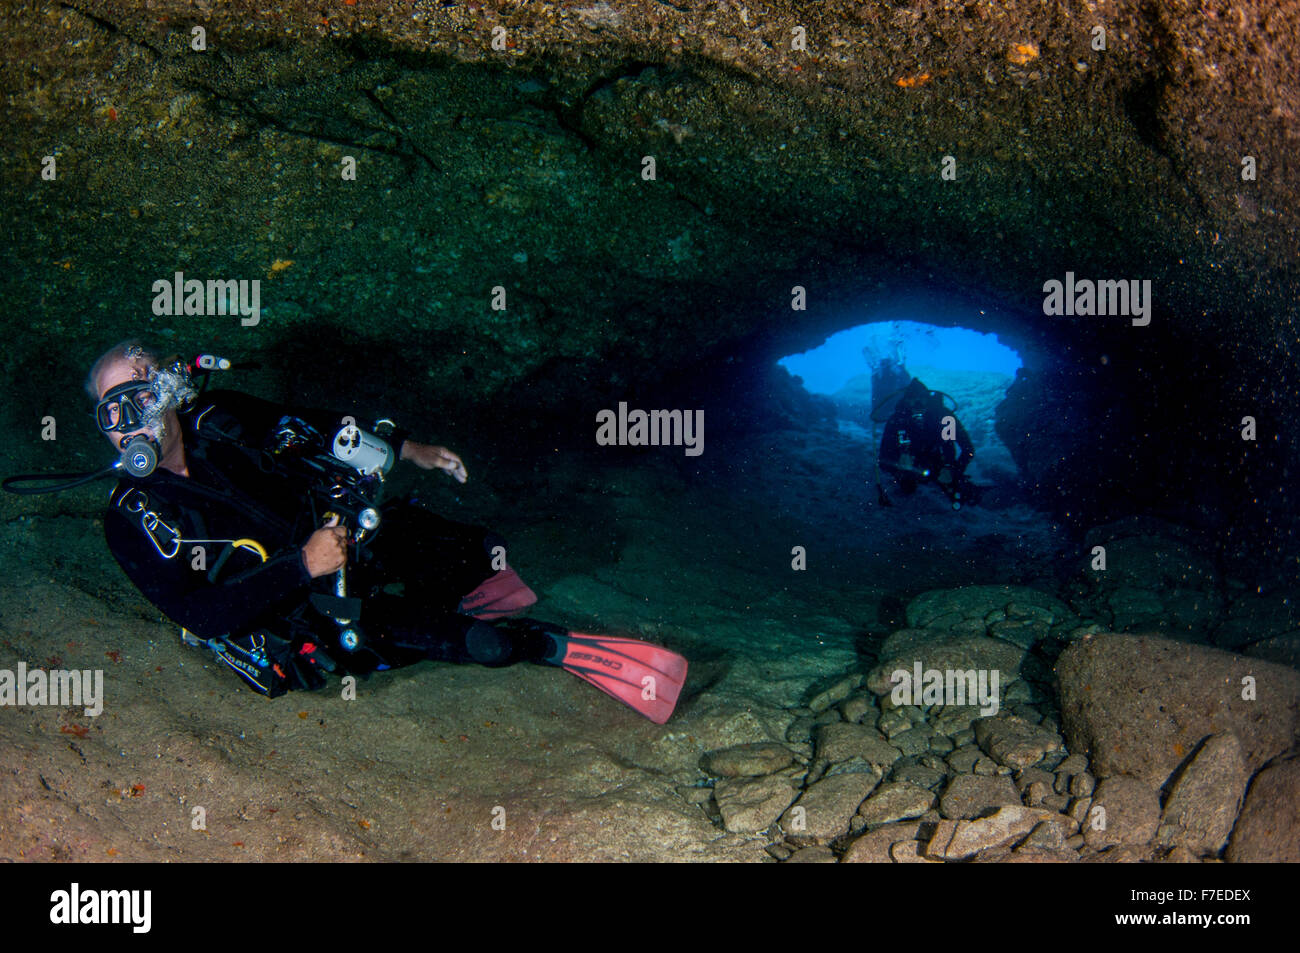 Divers explore natural caves and rocks in the Mediterranean sea off the coast of Larnaca, Cyprus, Stock Photo